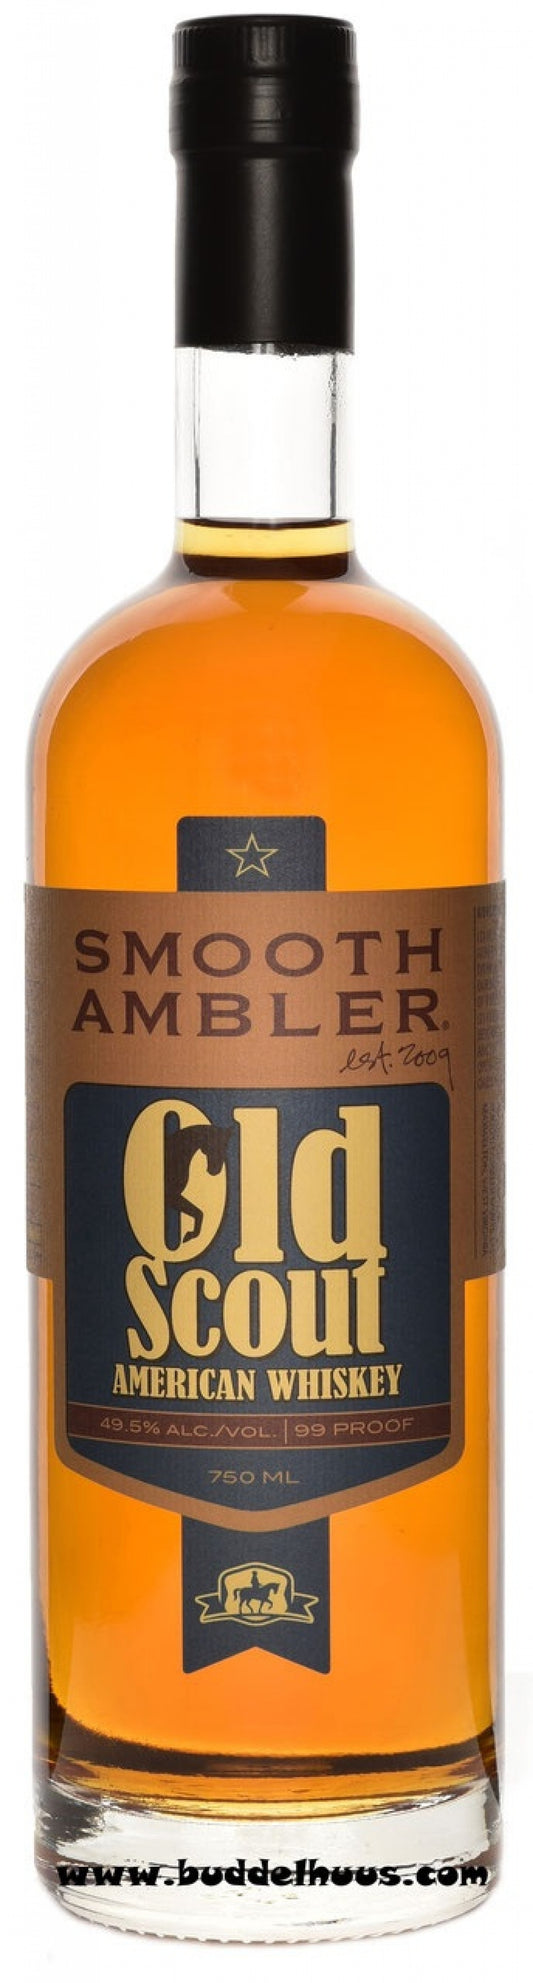 Smooth Ambler Old Scout